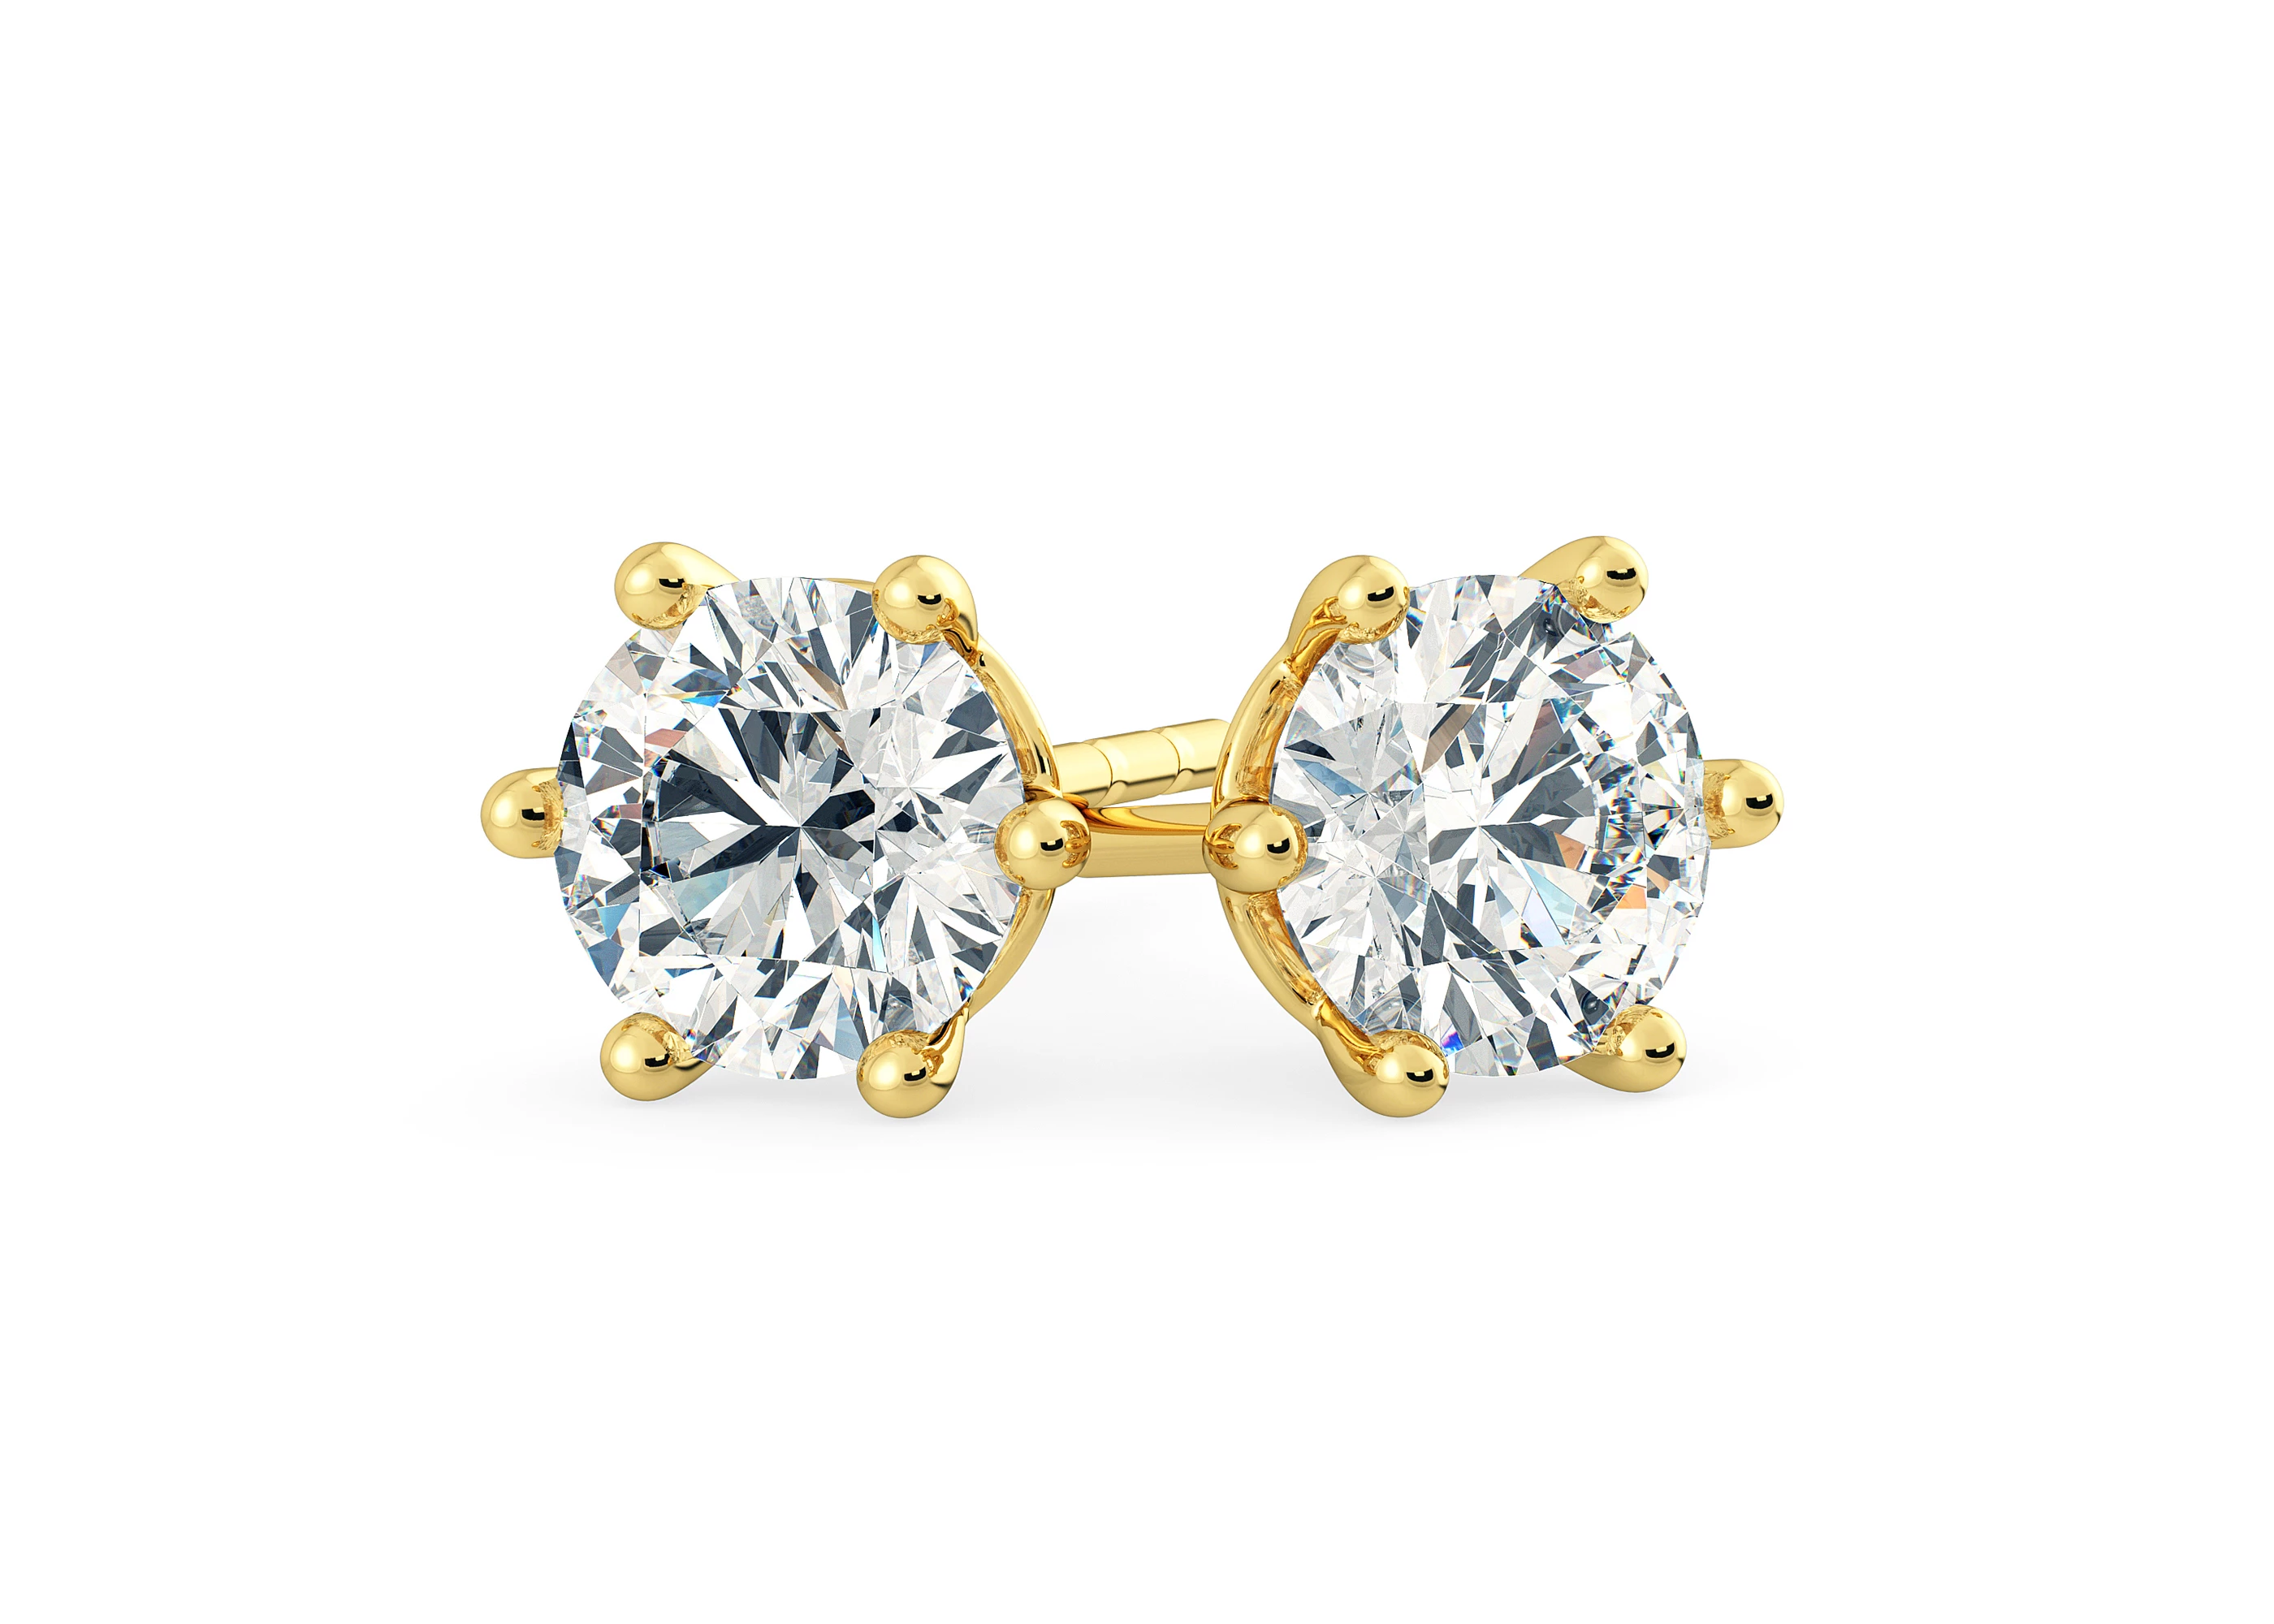 Bellezza Round Brilliant Diamond Stud Earrings in 18K Yellow Gold with Screw Backs